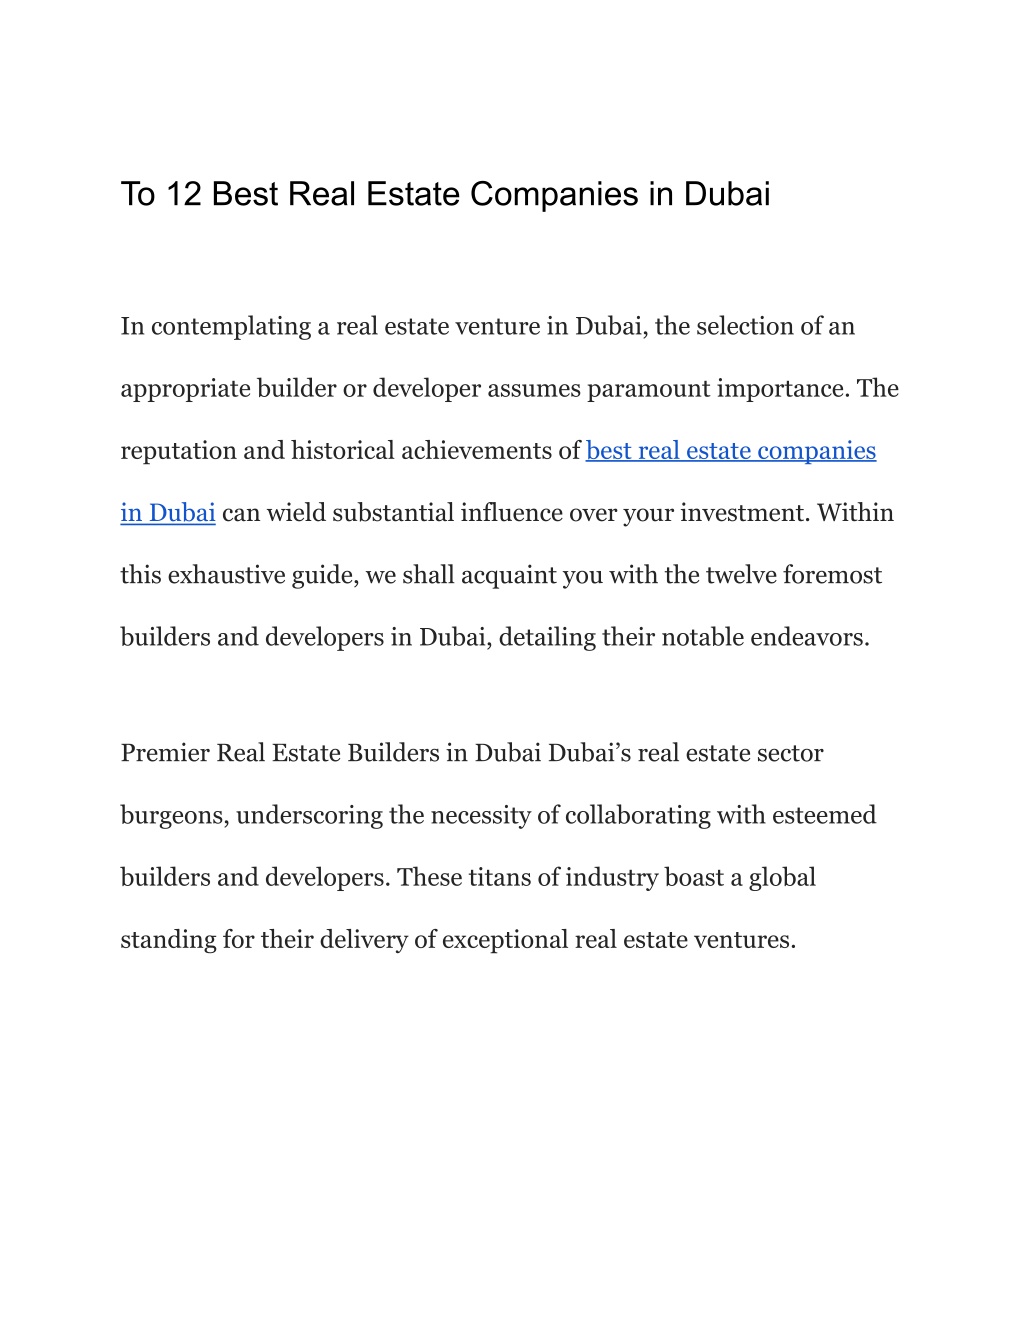 to 12 best real estate companies in dubai l.w